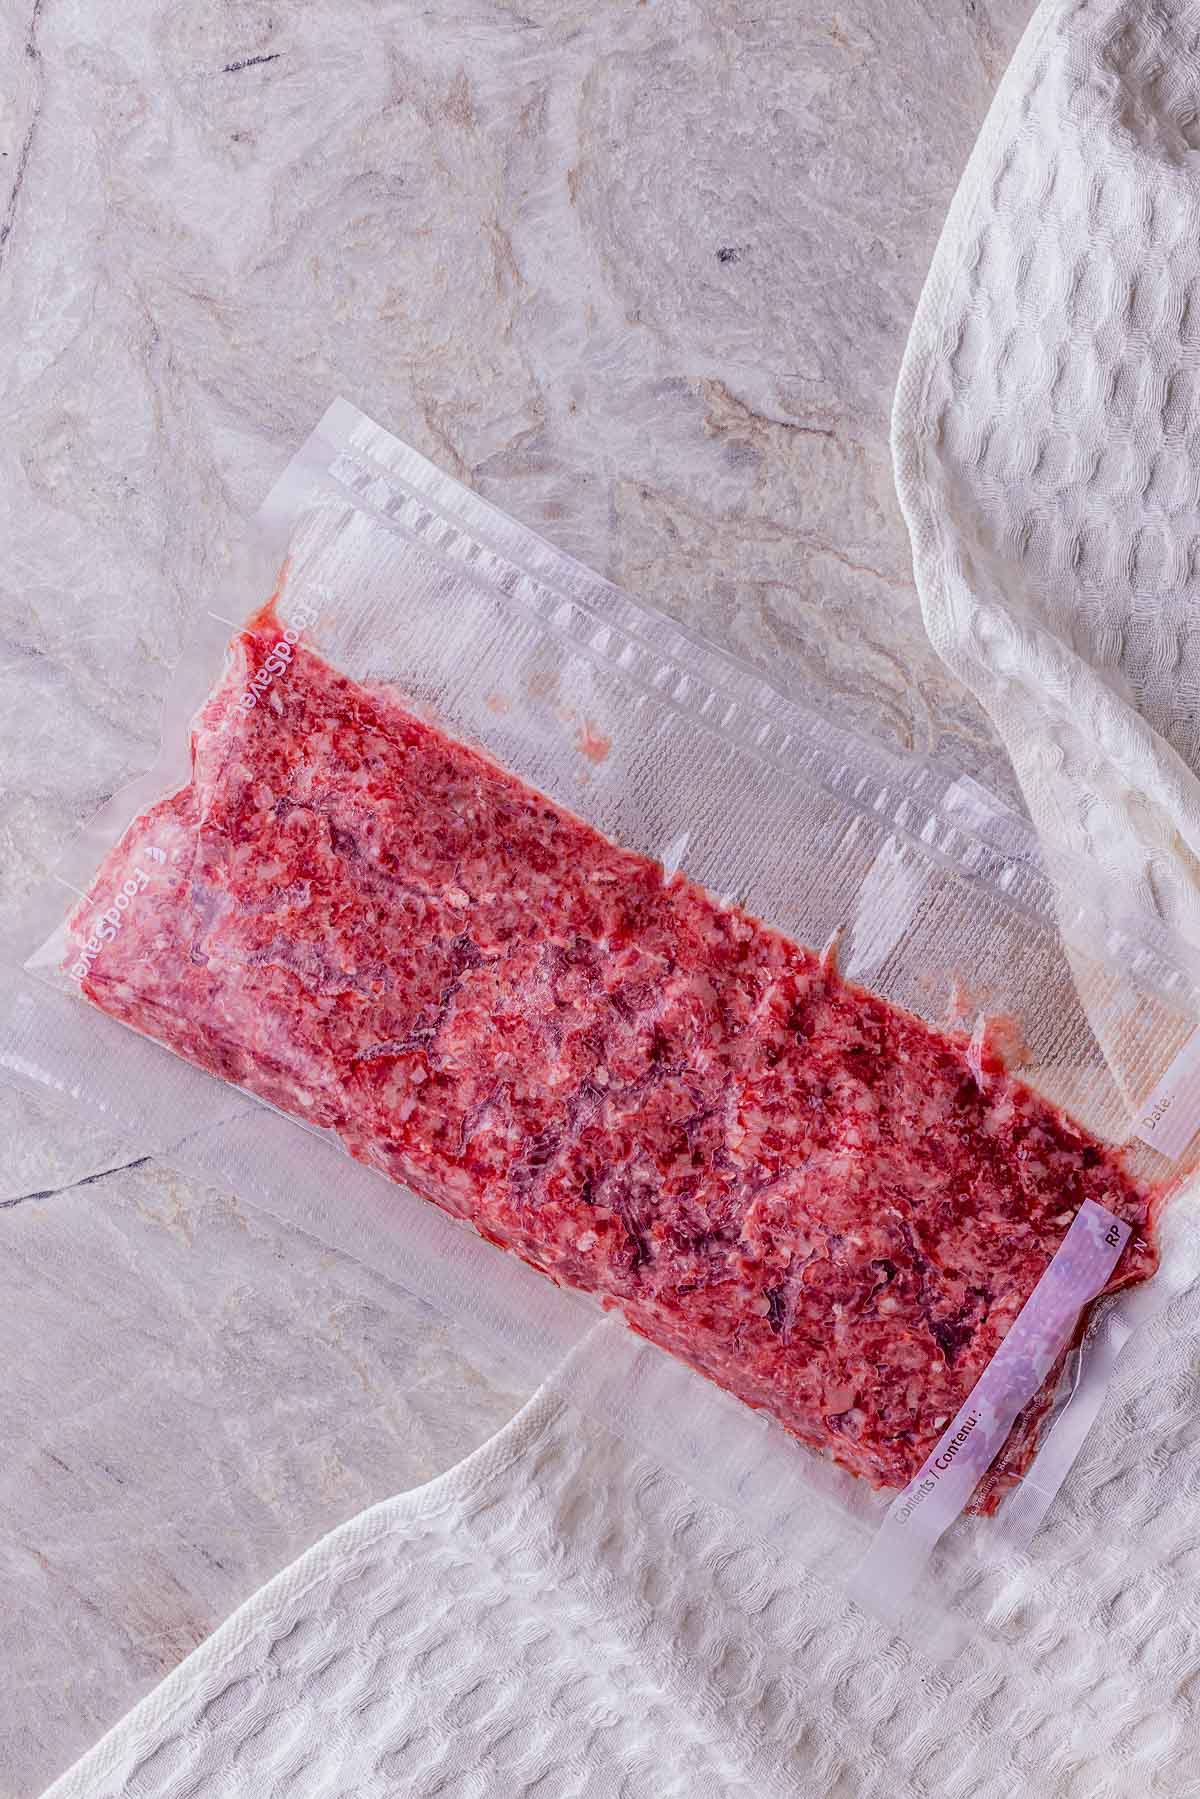 raw ground beef in a vacuum seal bag